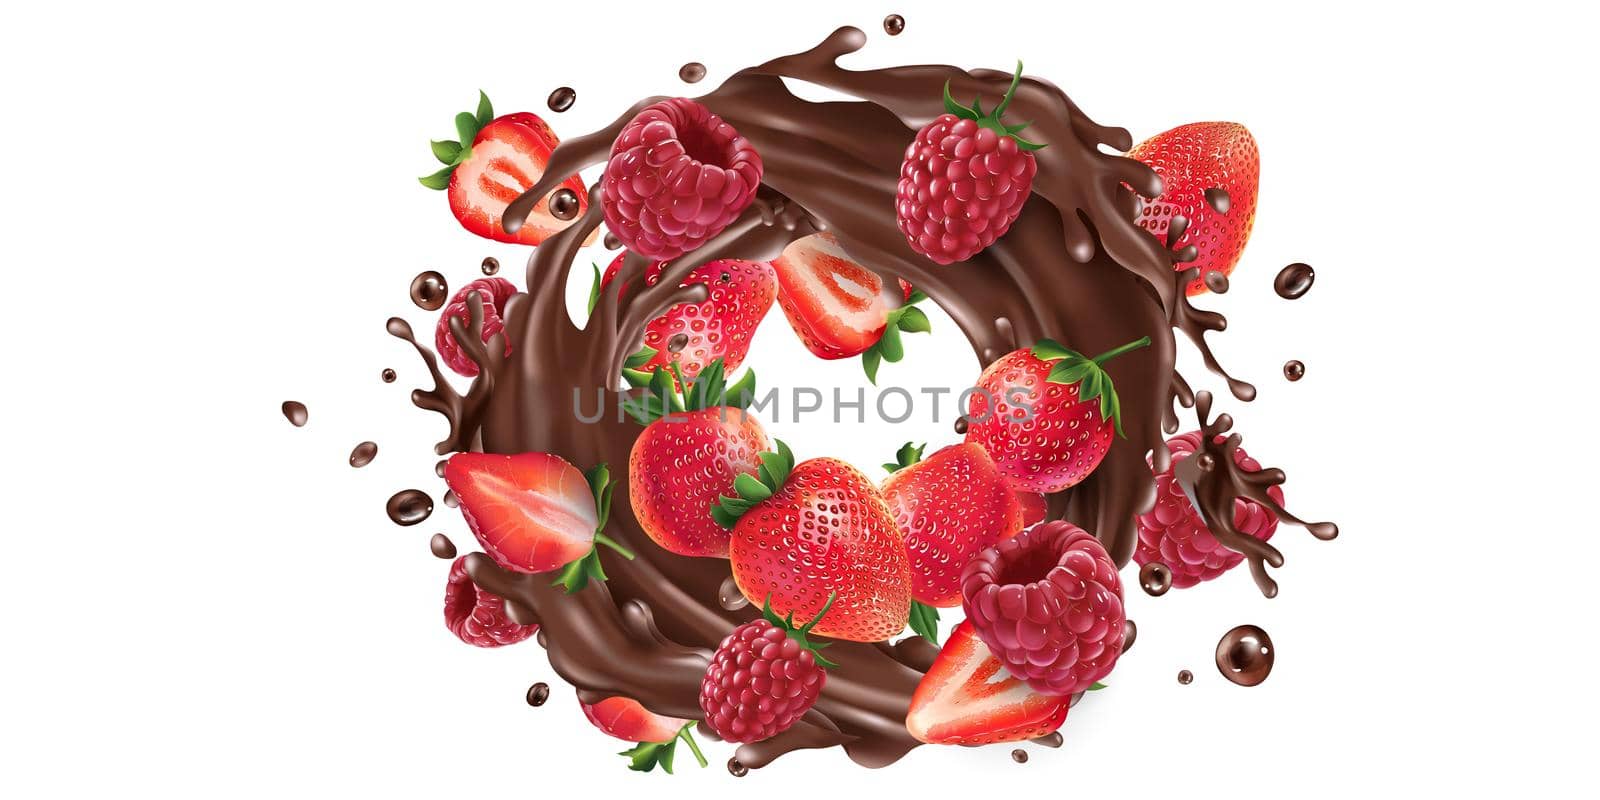 Fresh strawberries and raspberries in a chocolate splash. by ConceptCafe